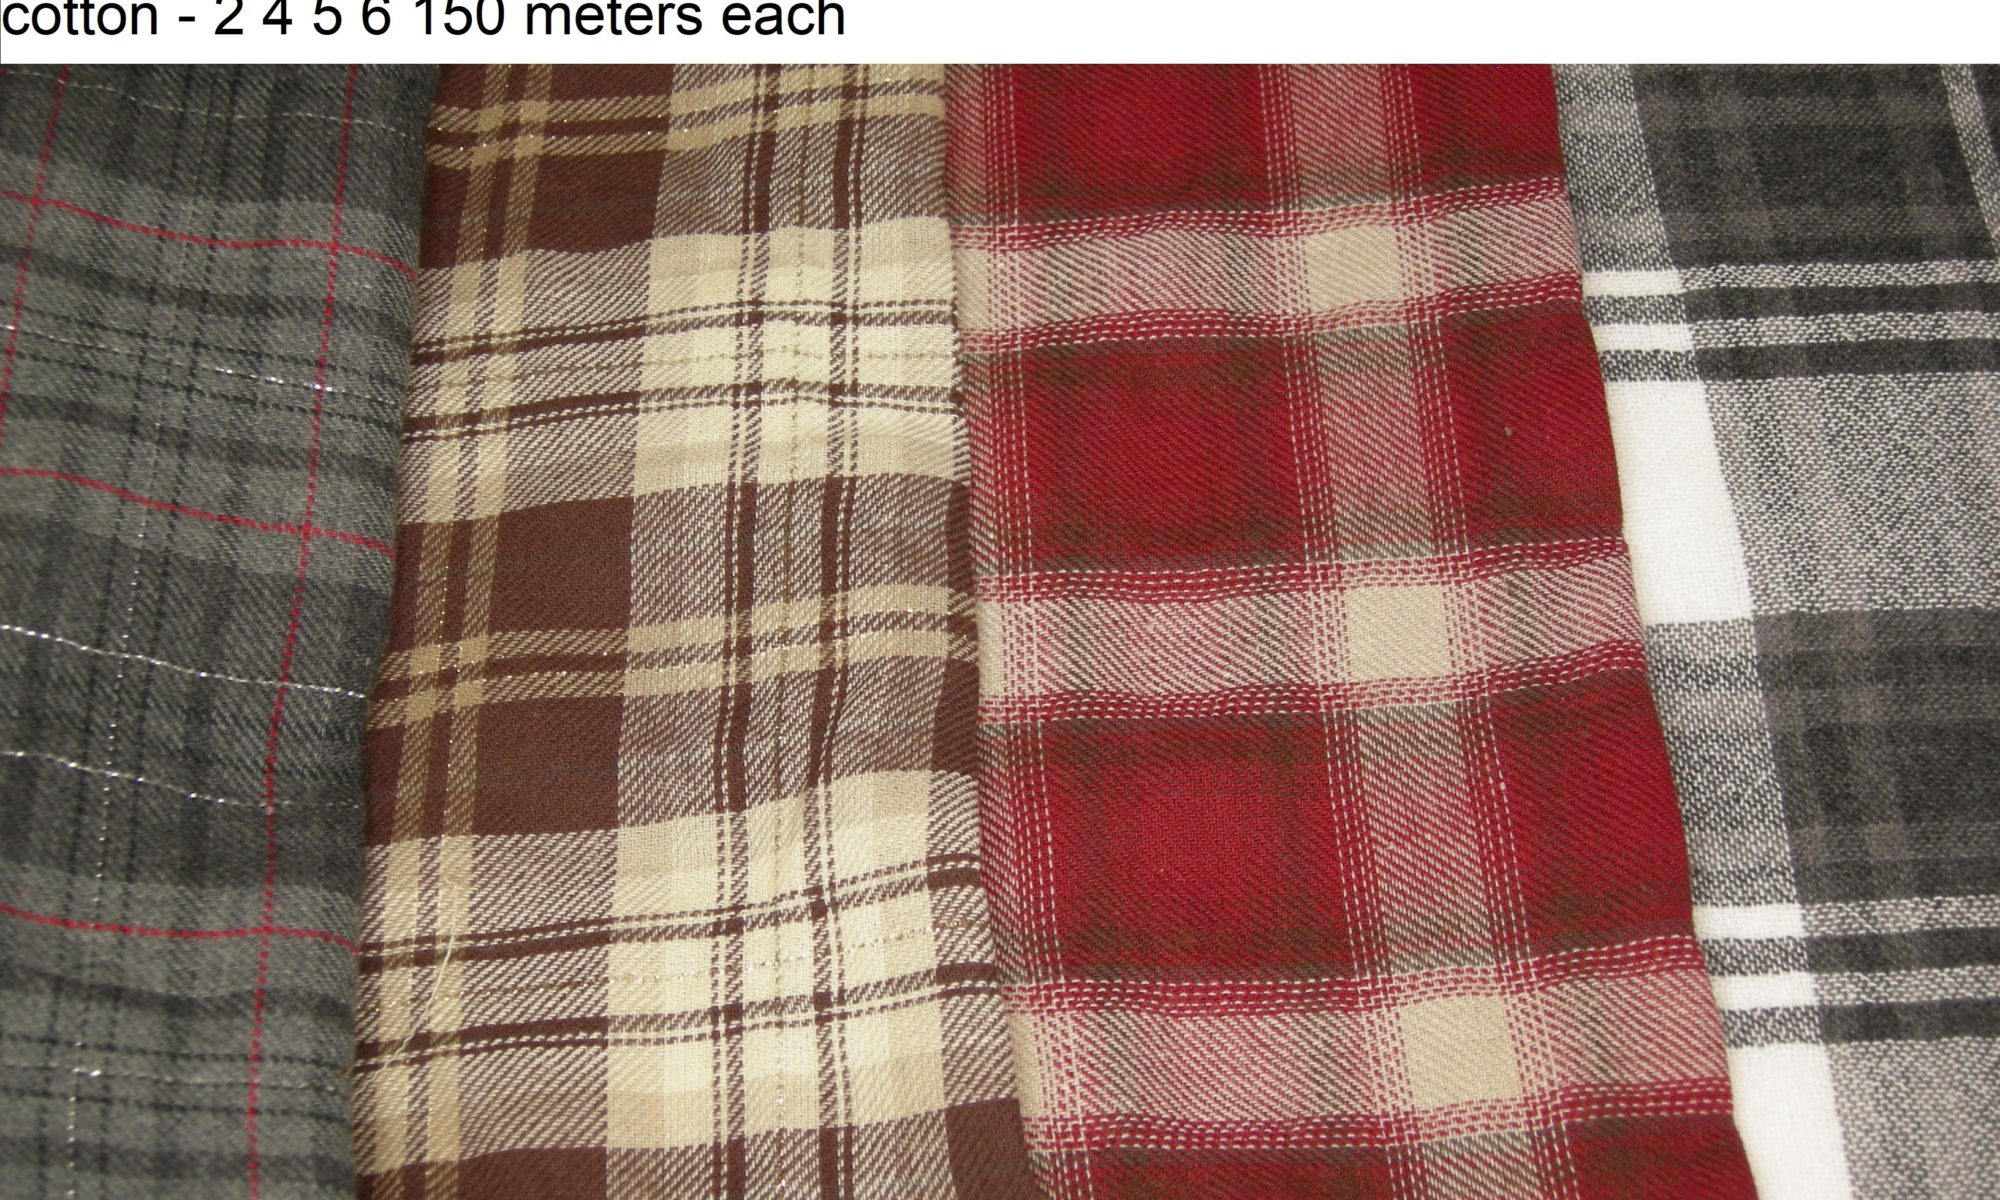 7749 checkered cotton viscose blend popelin shirt fabric WIDTH cm160 WEIGHT gr160 - gr100 square meter - COMPOSITION 70 viscose 30 cotton - 2 4 5 6 150 meters each